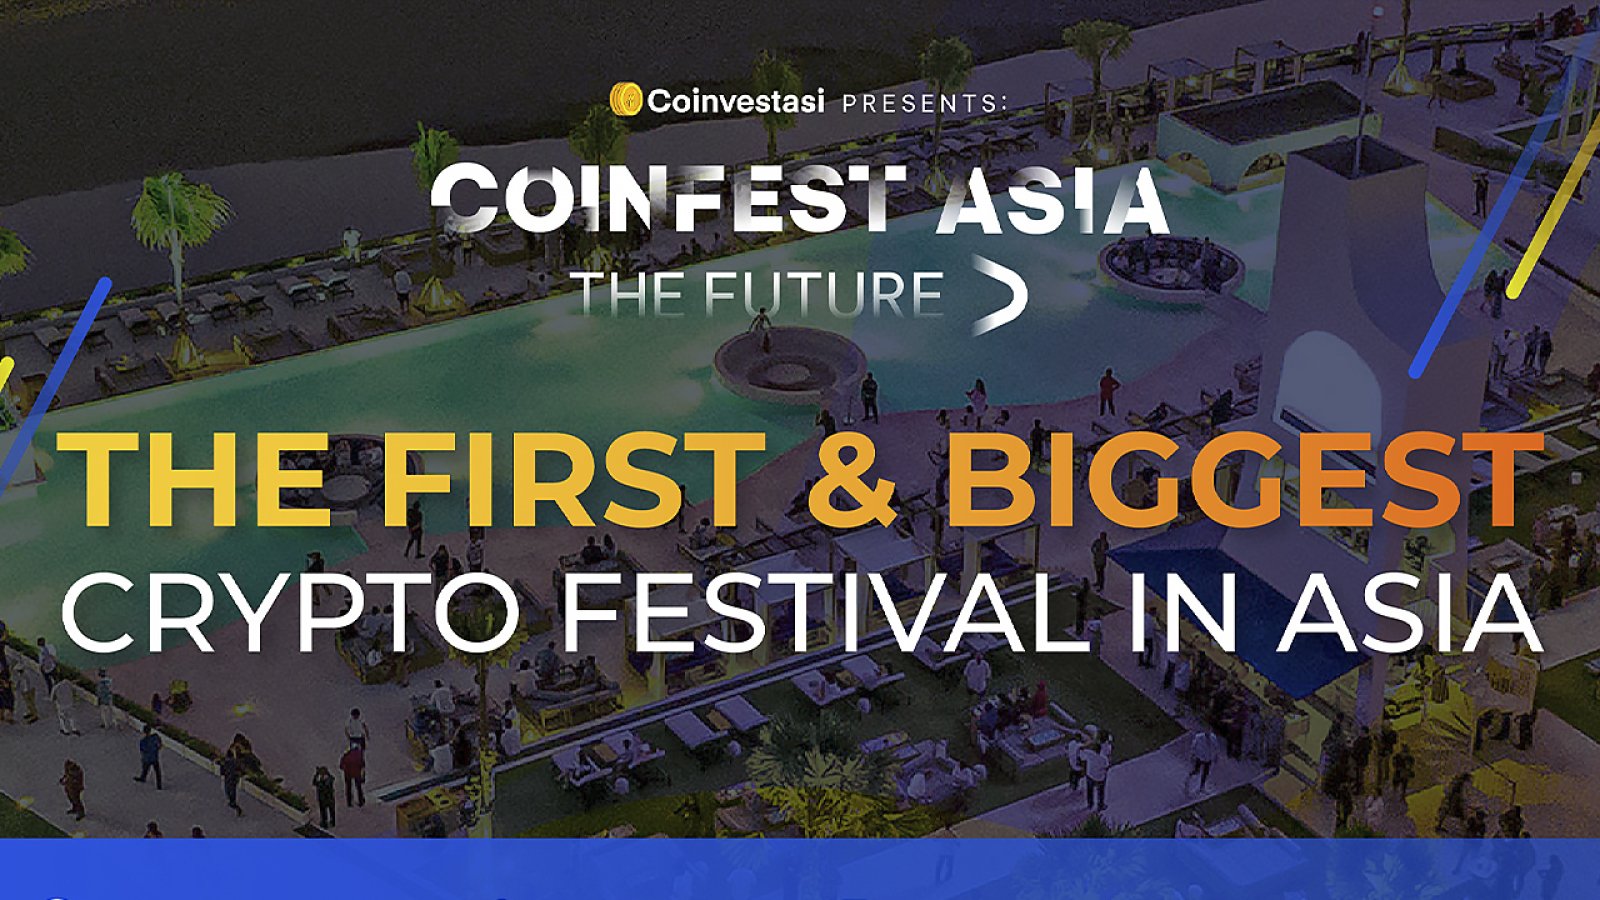 Indonesia to Host Coinfest Asia, The First and Biggest Crypto Festival in Asia